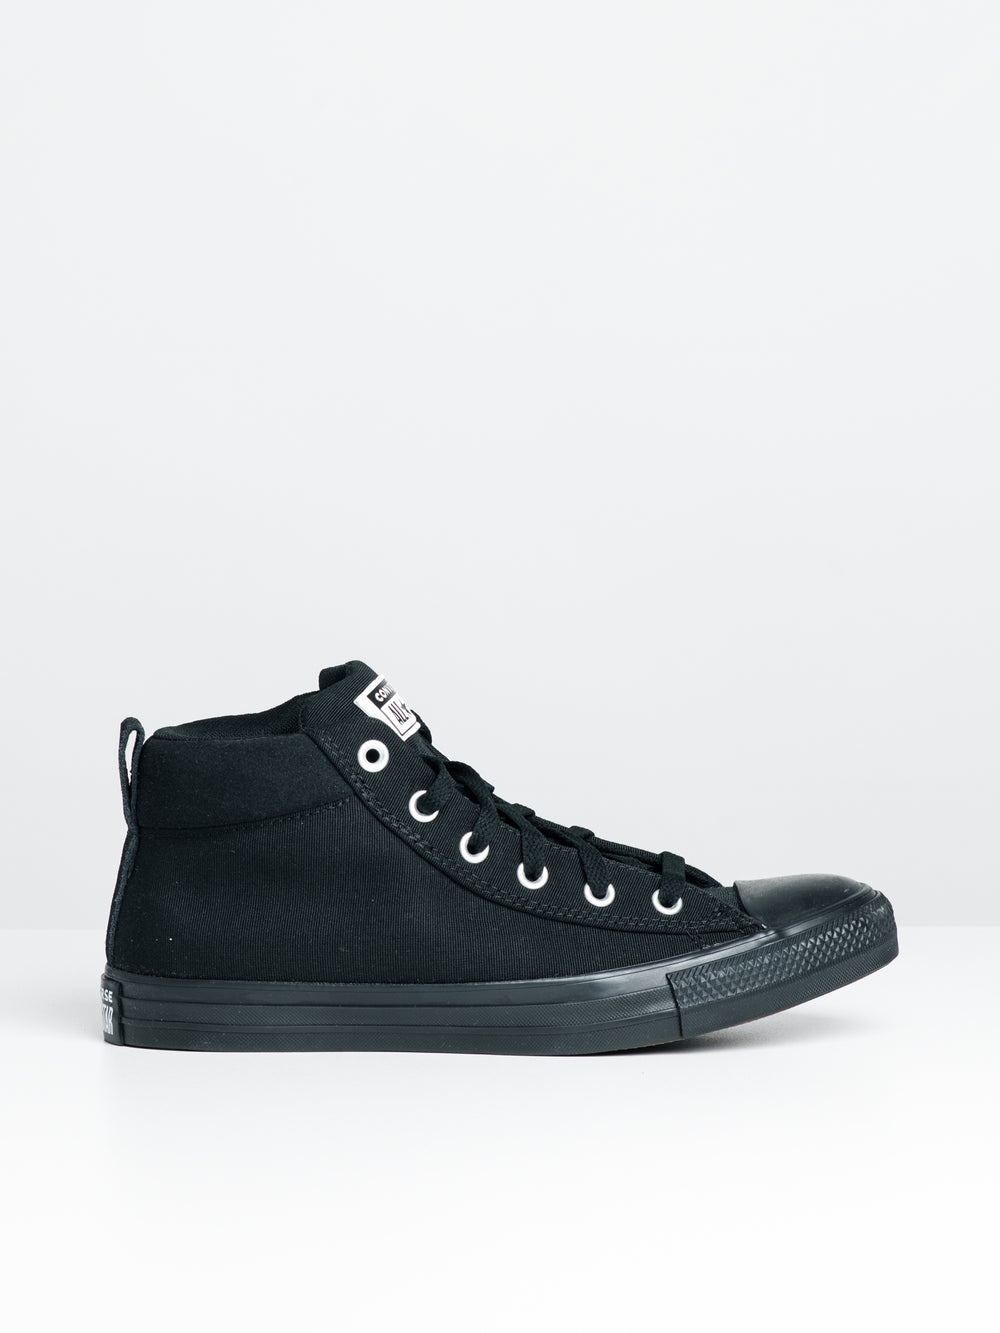 MENS CONVERSE CHUCK TAYLOR ALL STAR STREET MID TOP SNEAKERS - CLEARANCE